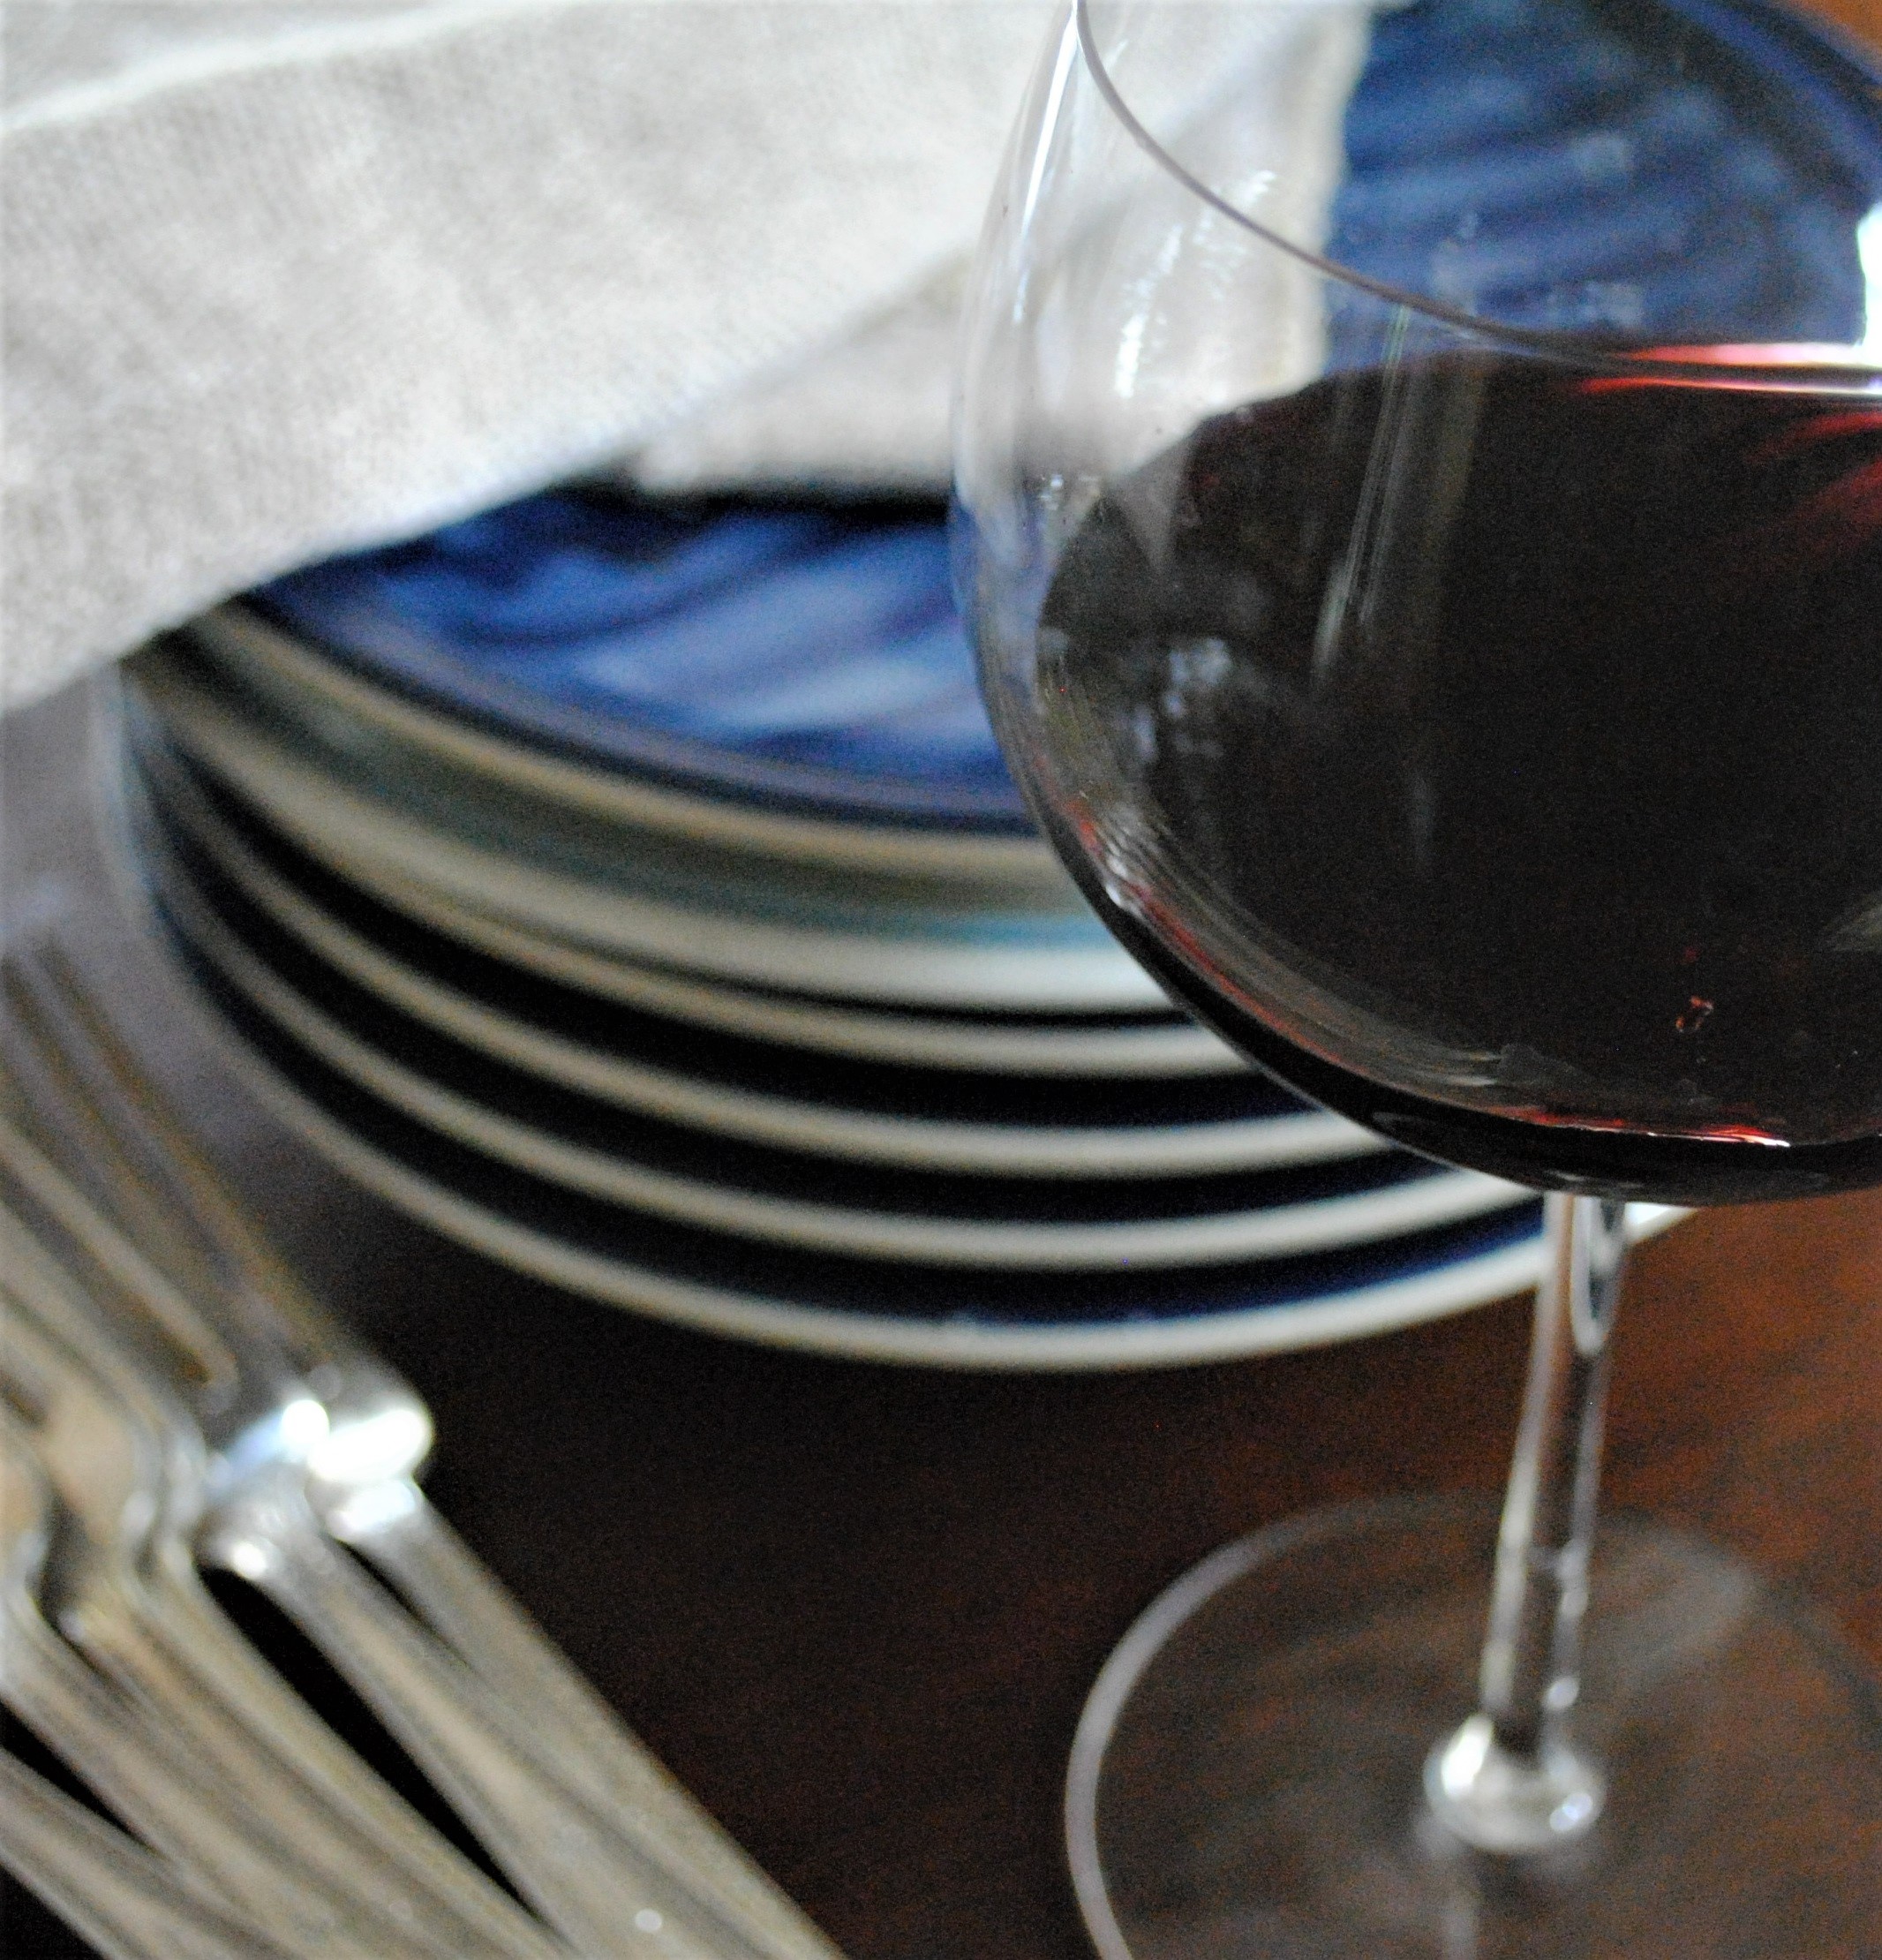 Red wine glass with plates and silverware.